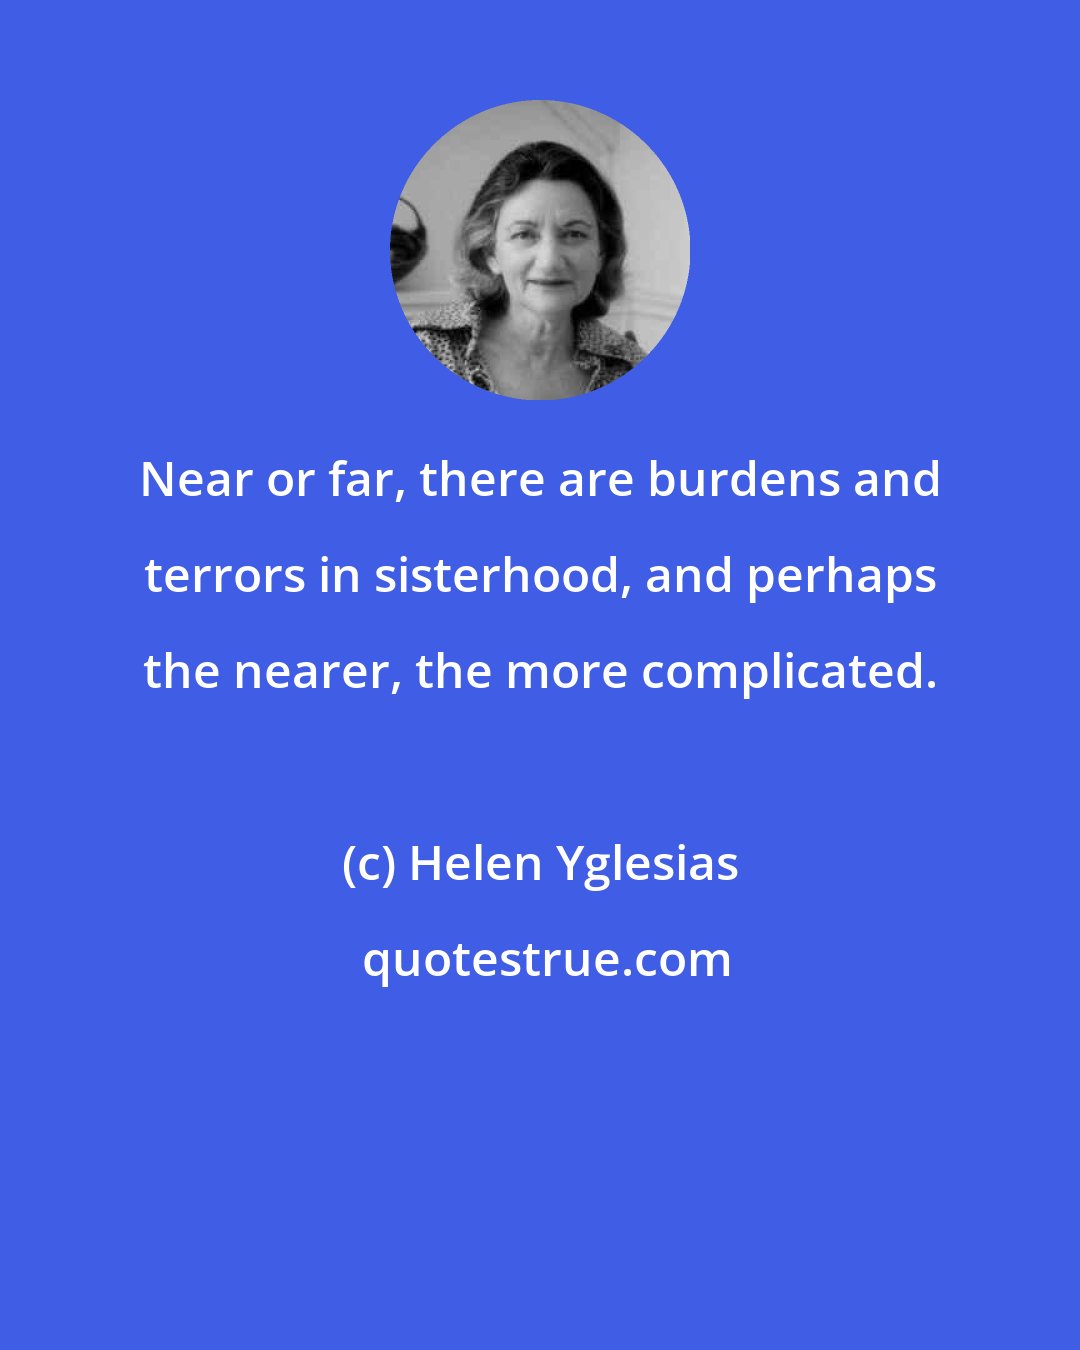 Helen Yglesias: Near or far, there are burdens and terrors in sisterhood, and perhaps the nearer, the more complicated.